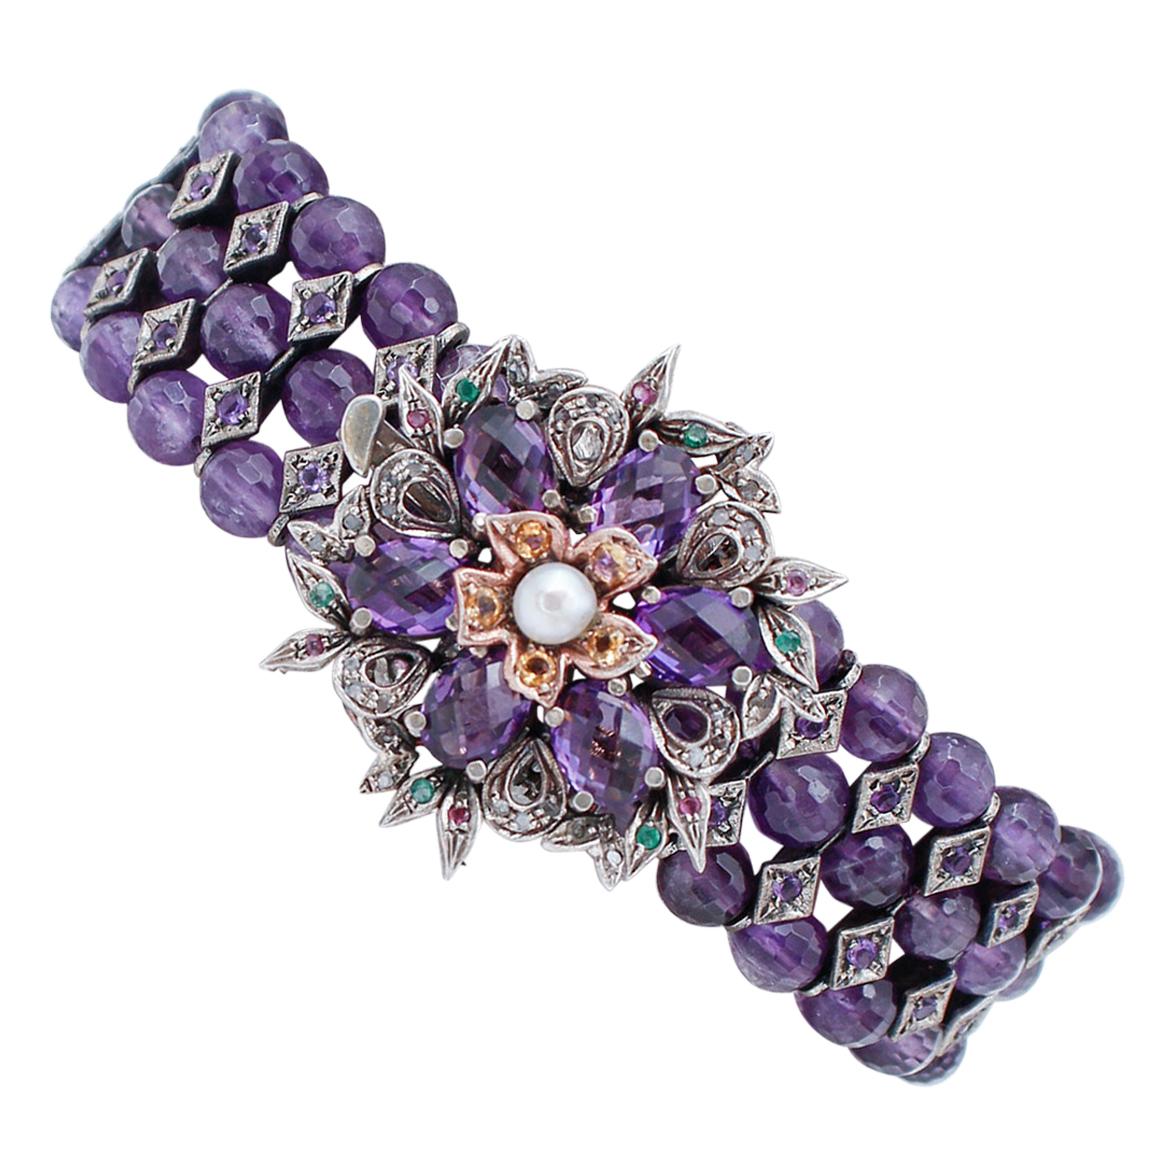 Diamonds Emeralds Rubies Hydro Amethysts Stones Pearl Gold and Silver Bracelet